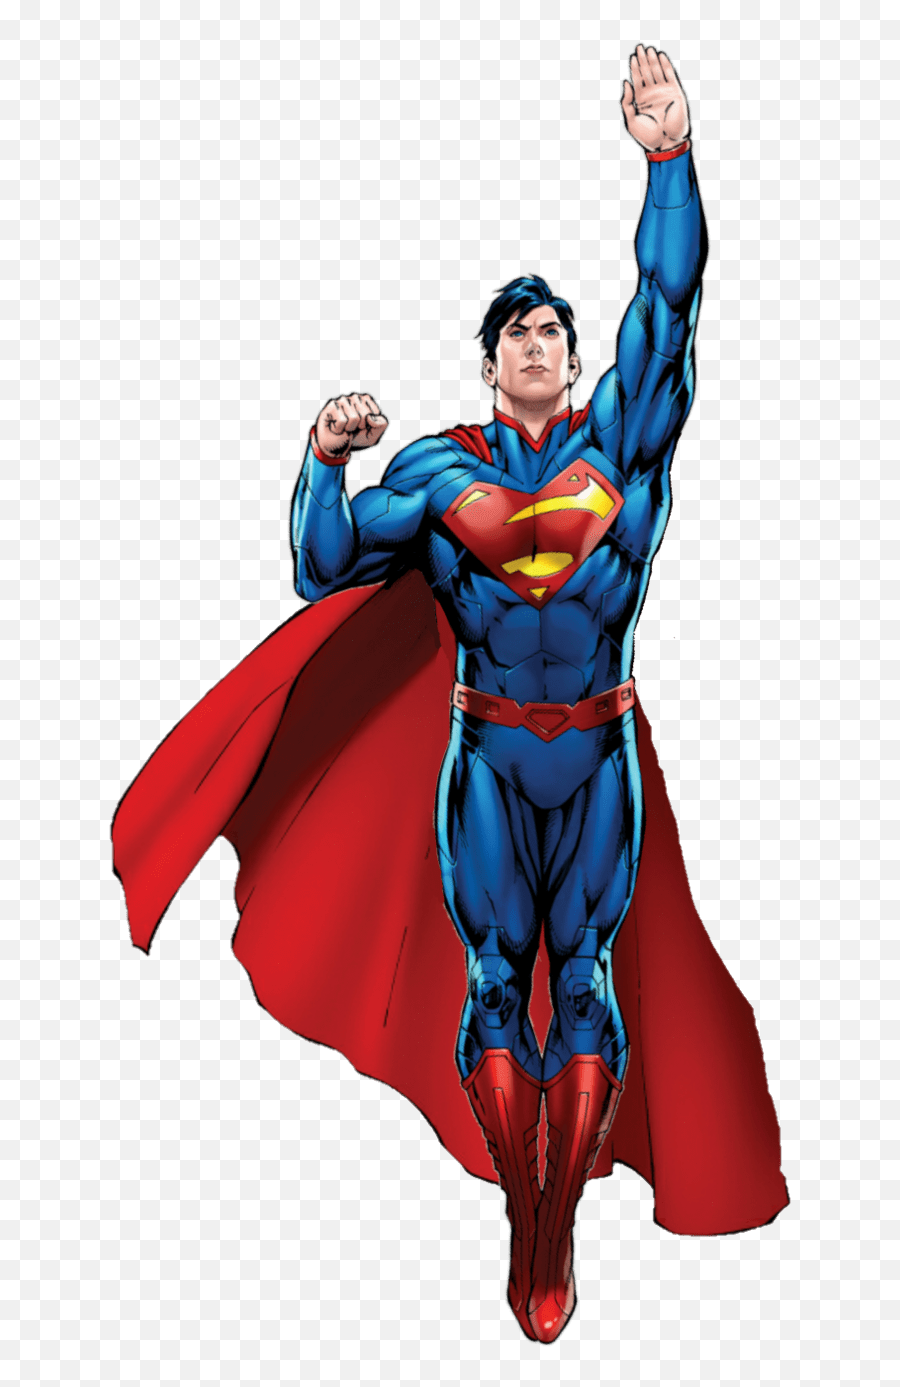 Superman Emoji Art Copy And Paste For 2021 Printable And,Skype Emoticon Code